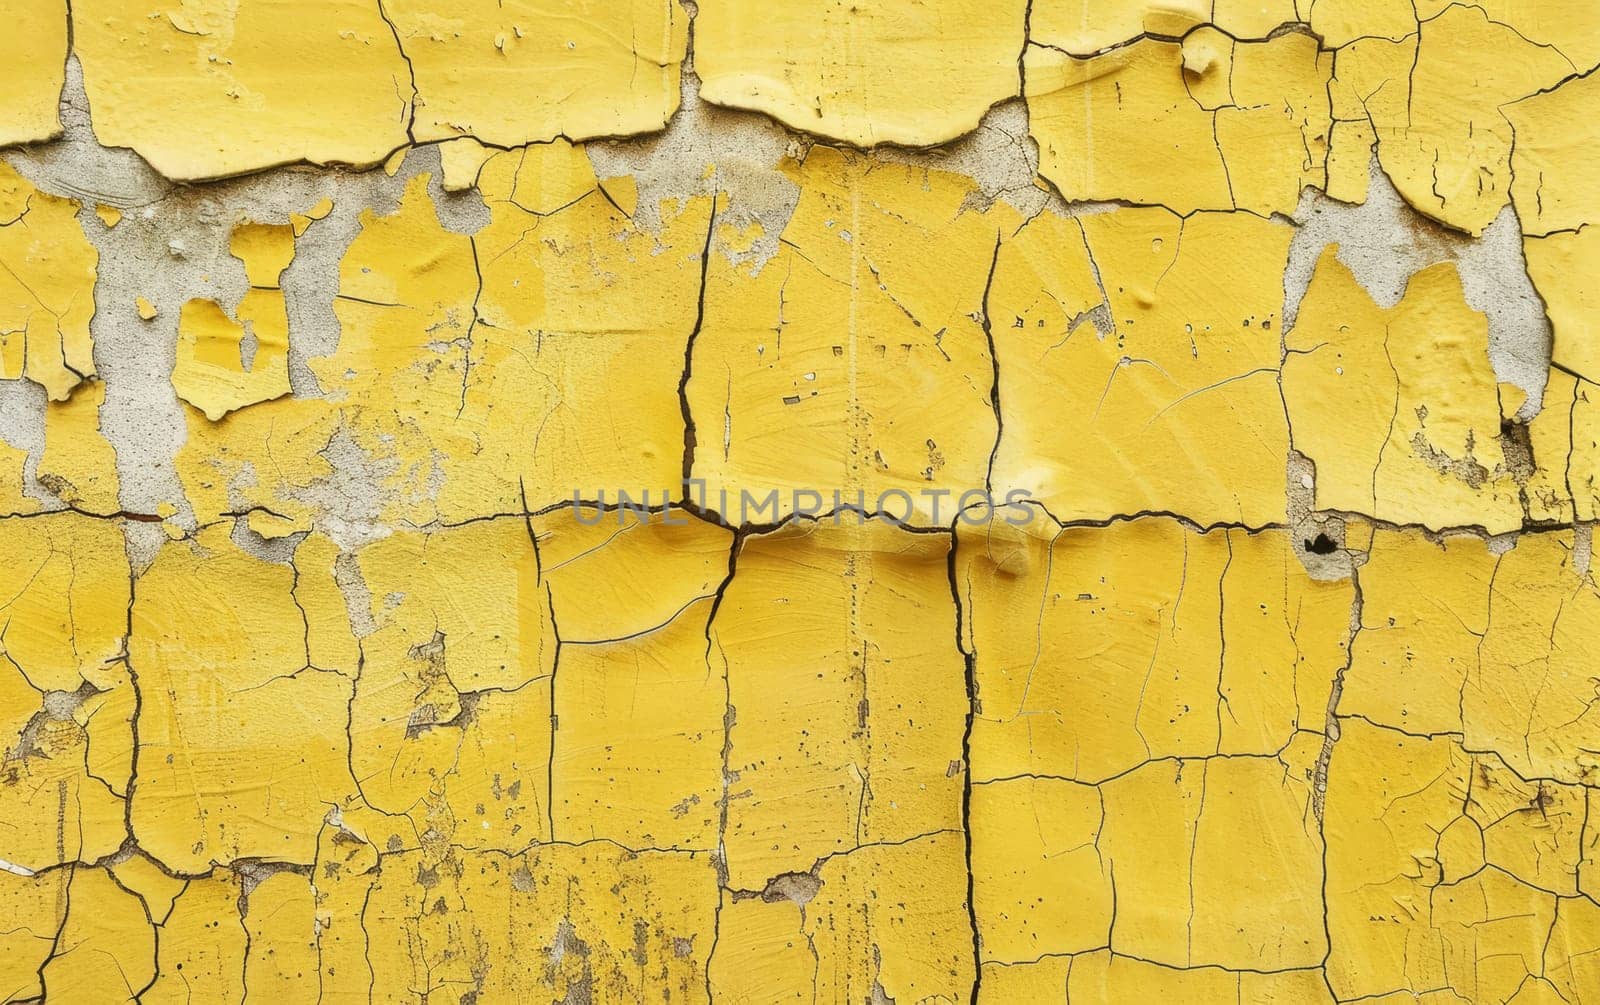 A vivid yellow paint layer cracks and peels, offering an abstract mosaic of color and texture. The image captures the intriguing effects of weathering on surfaces